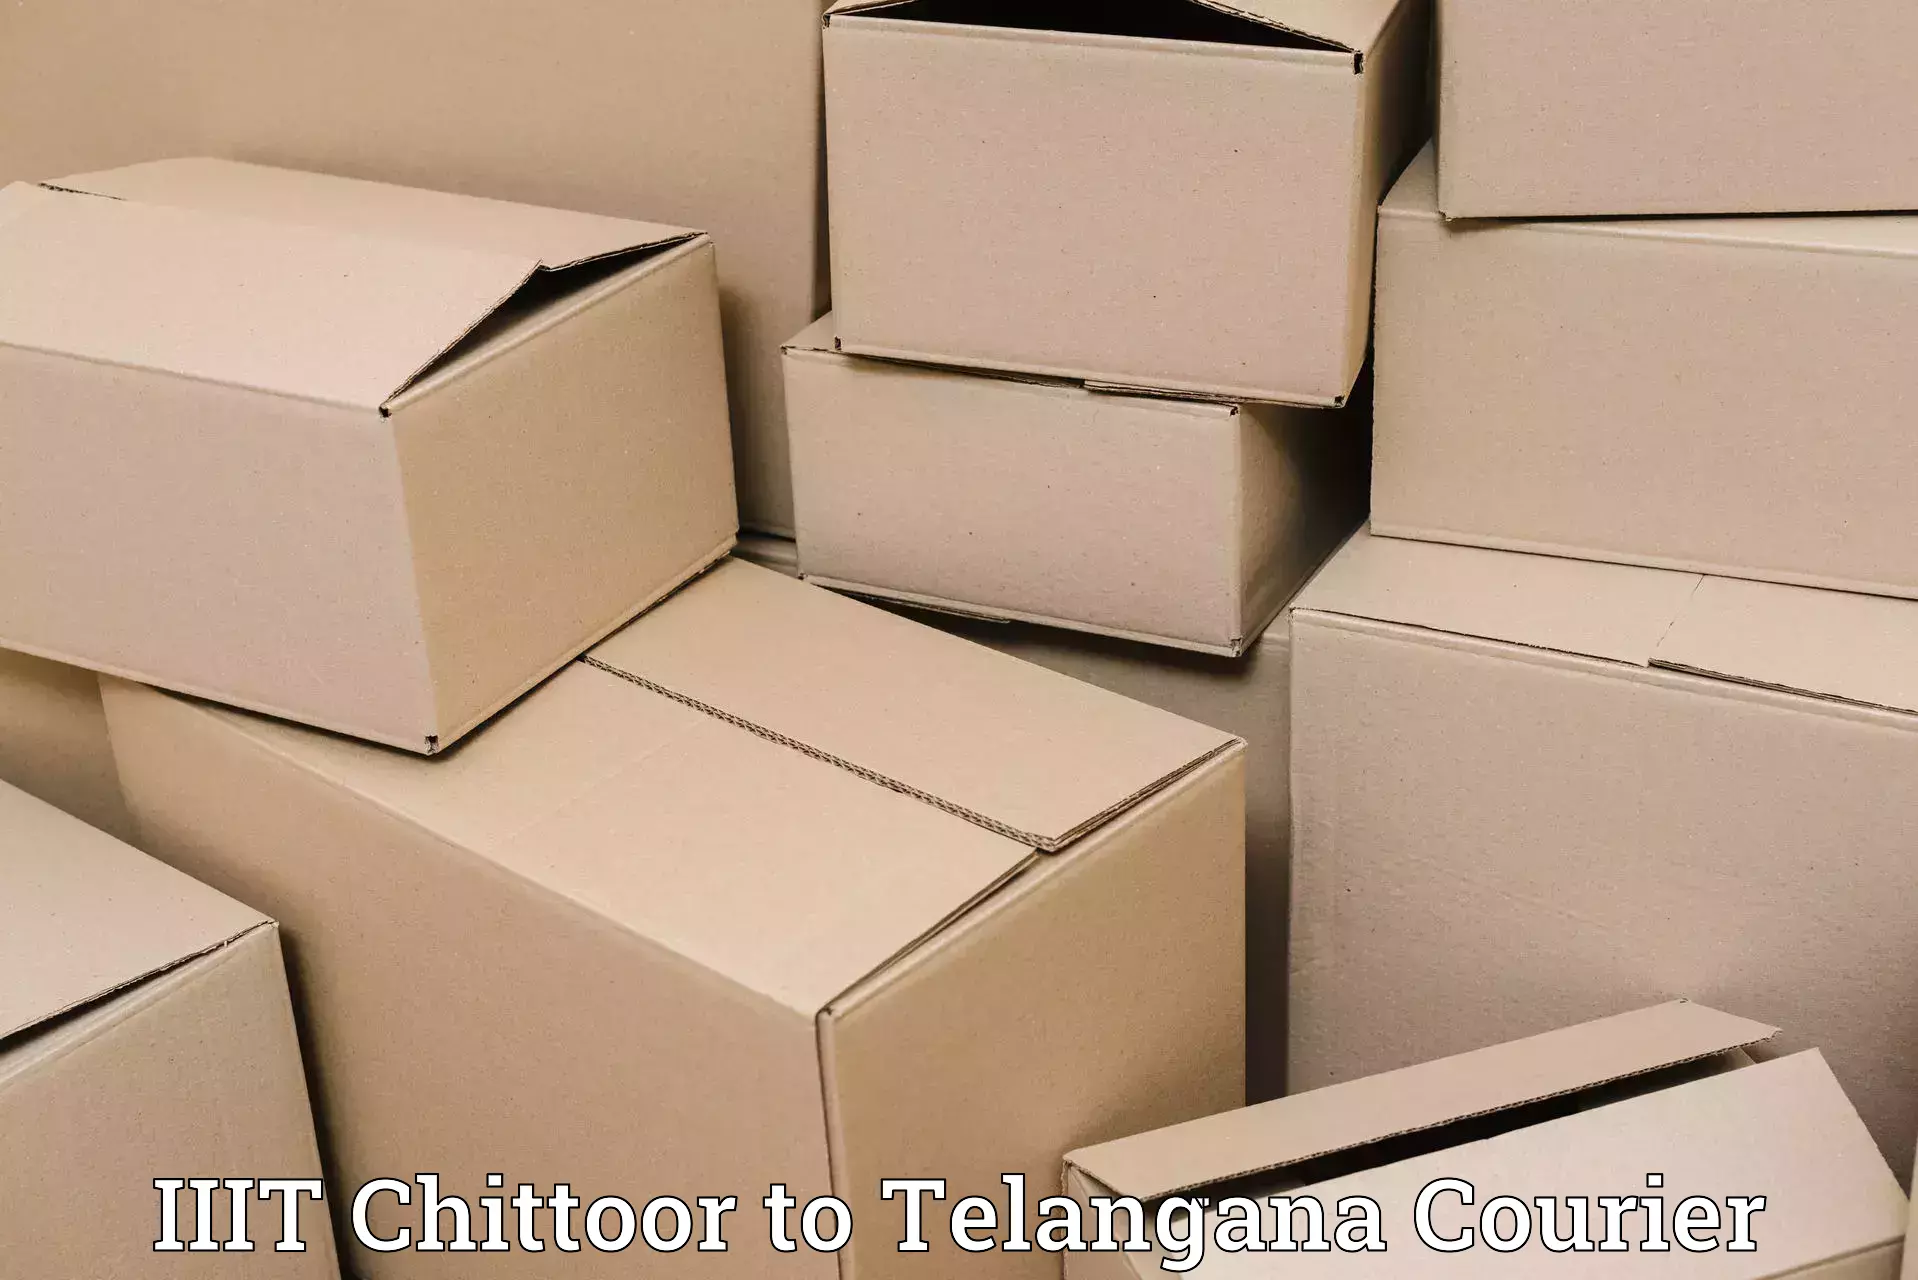 Comprehensive shipping network IIIT Chittoor to Ghanpur